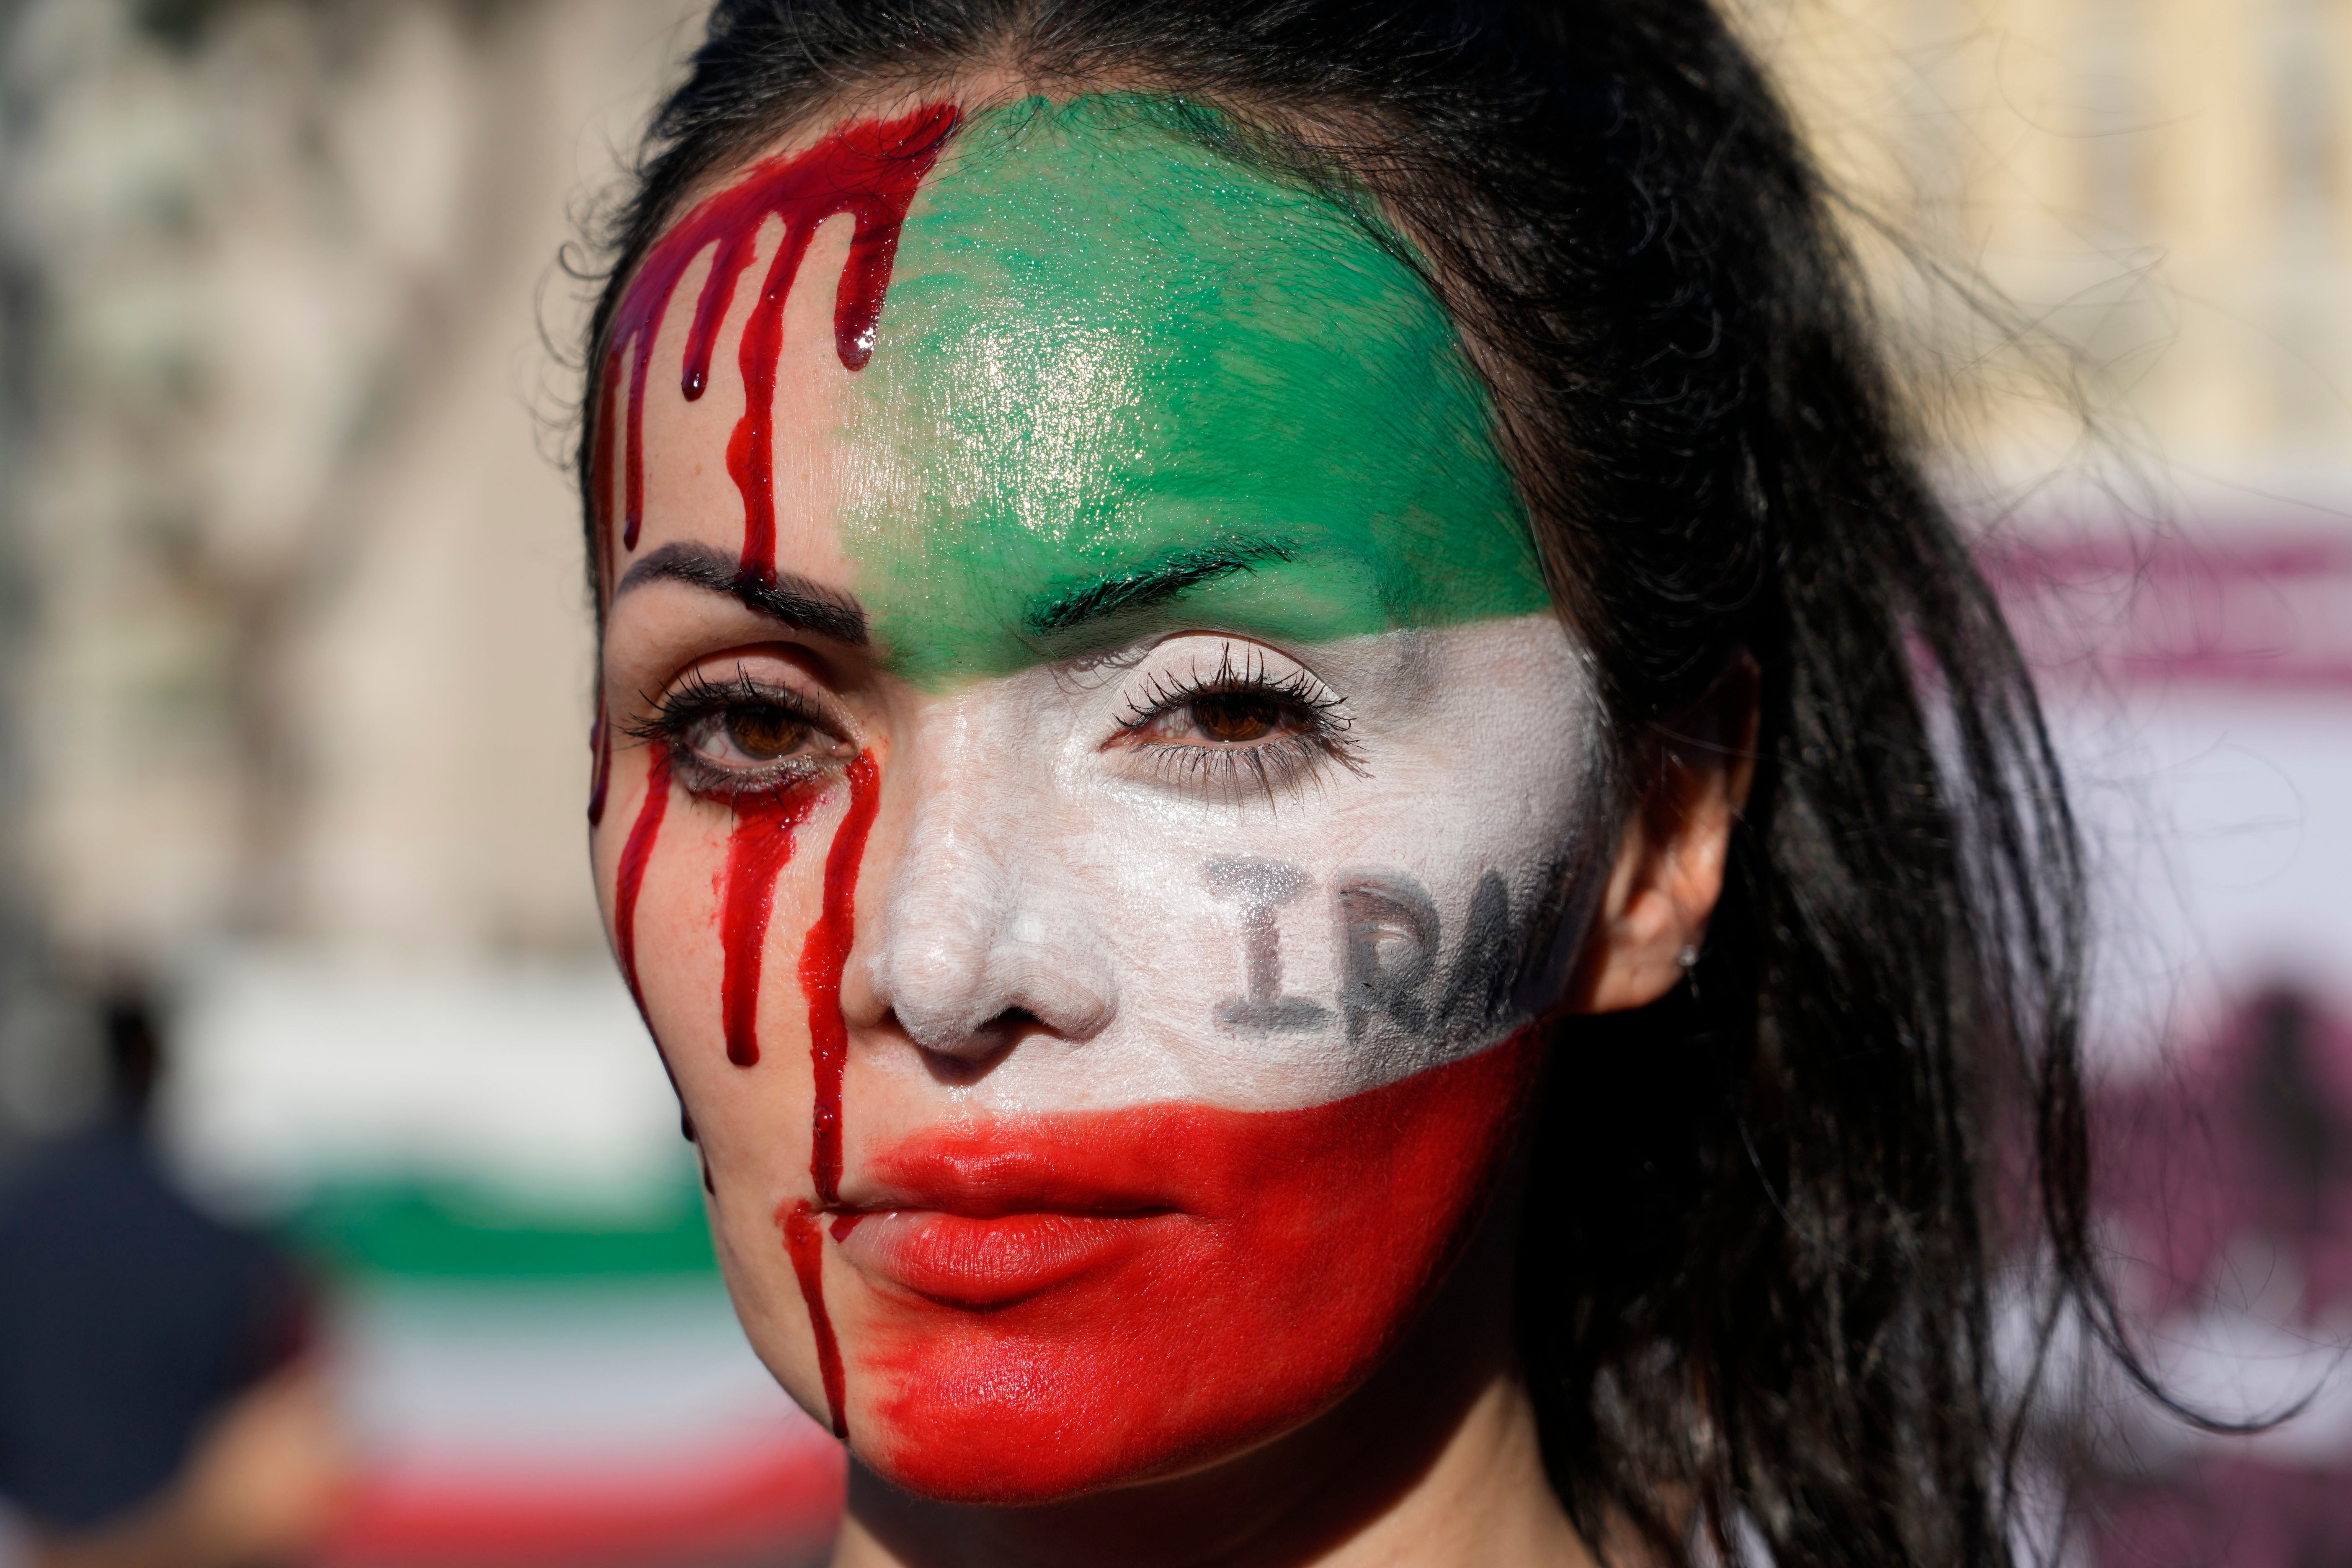 Woman protests against the death of Mahsa Amini, a woman who died while in police custody in Iran, during a rally in Rome